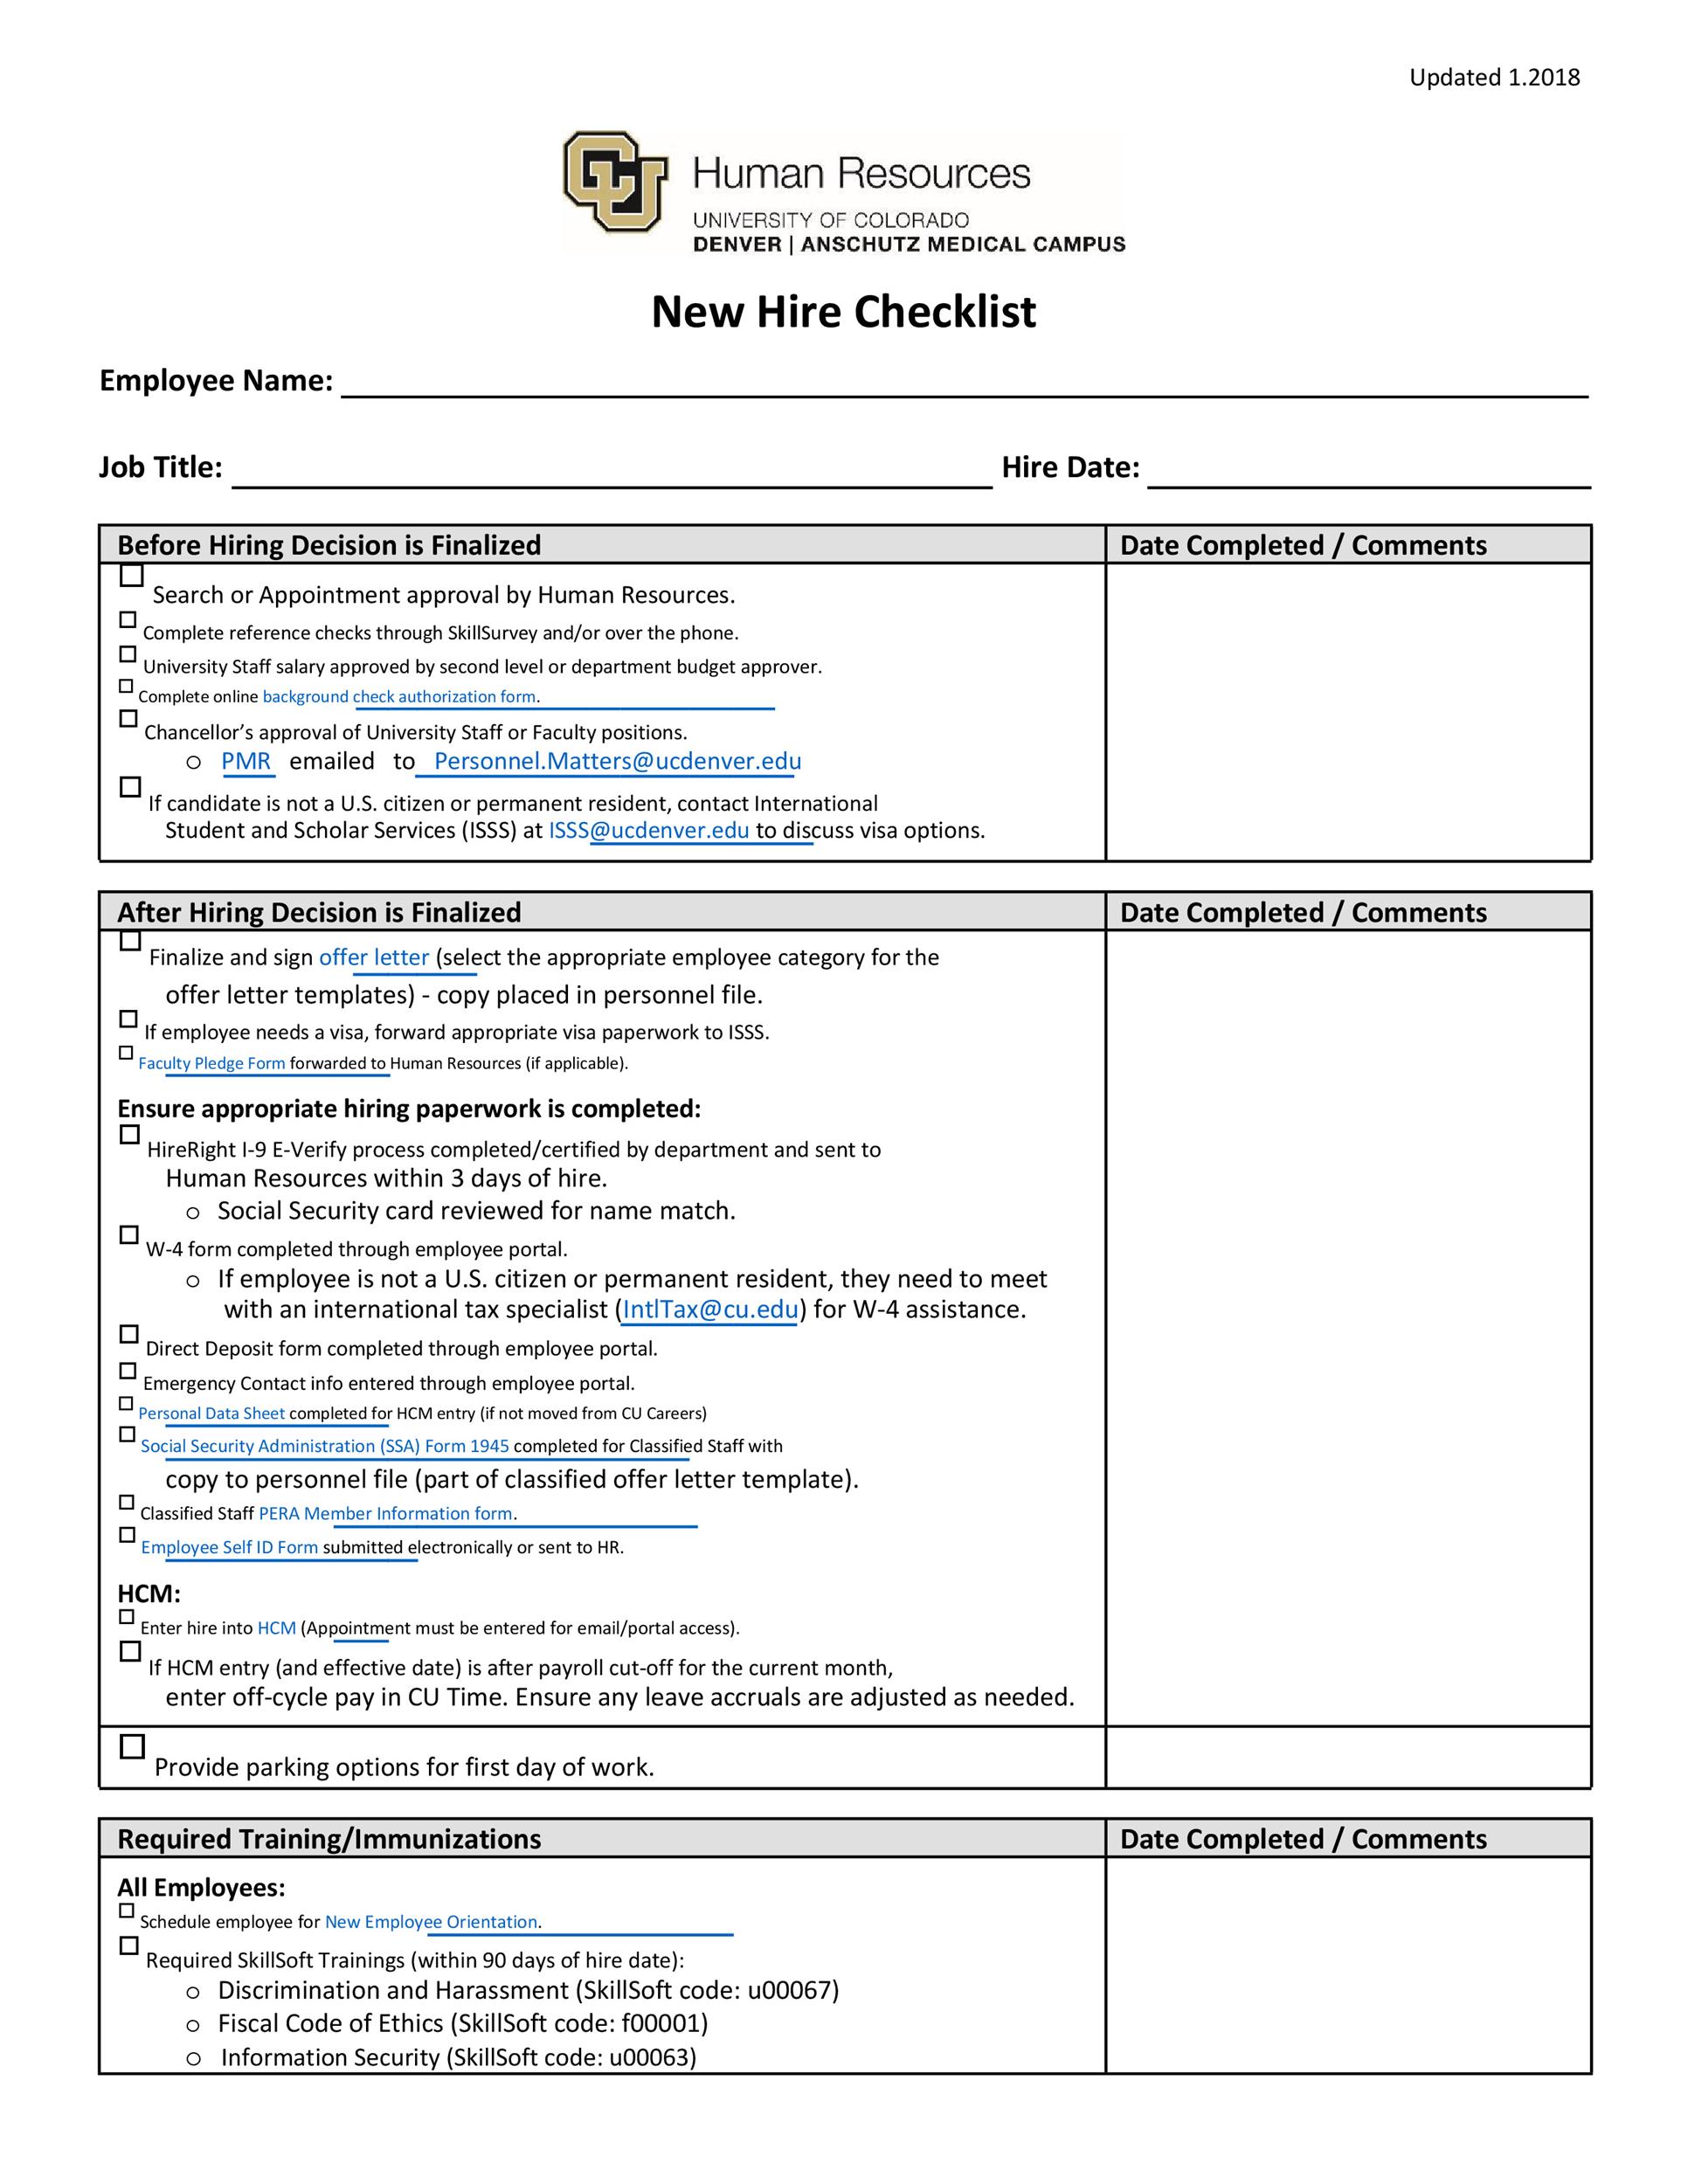 new-employee-onboarding-checklist-template-excel-tutore-org-master